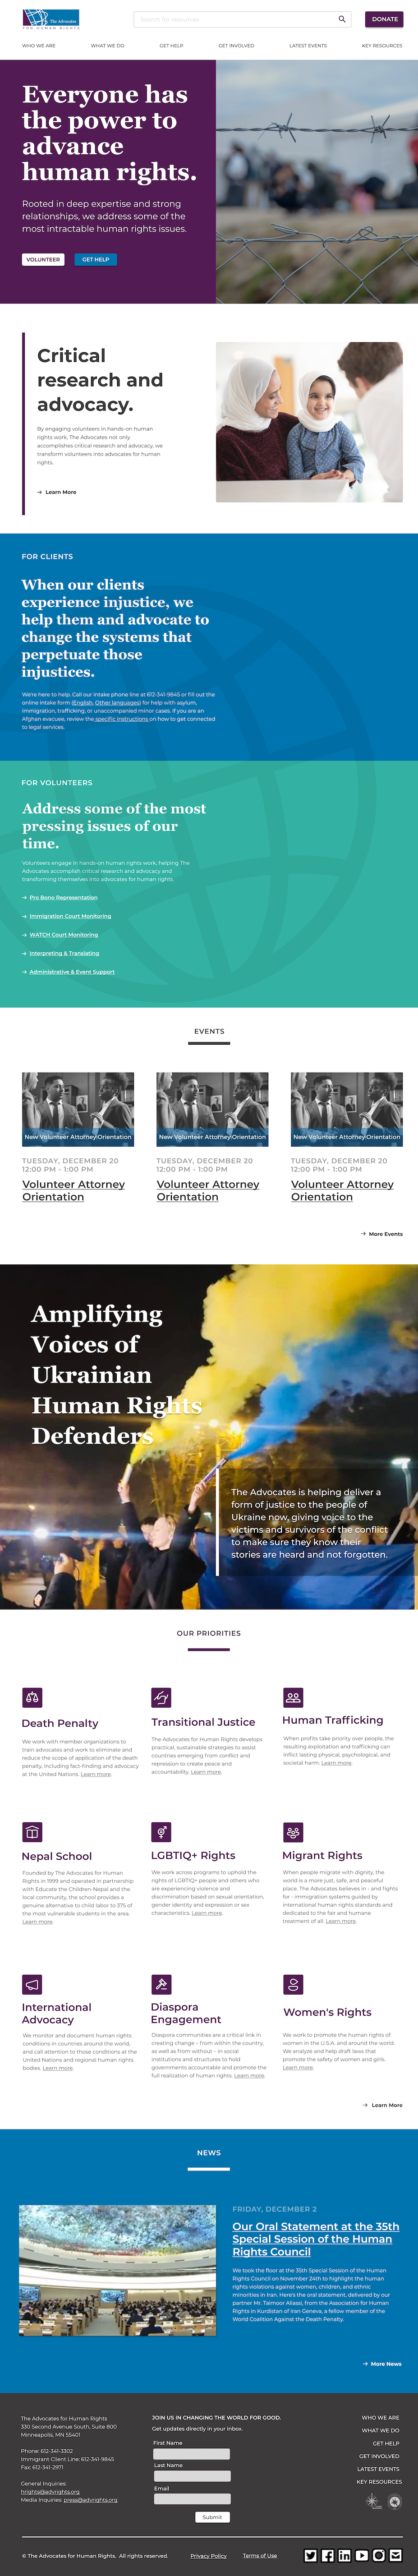 the advocates for human rights homepage mockup